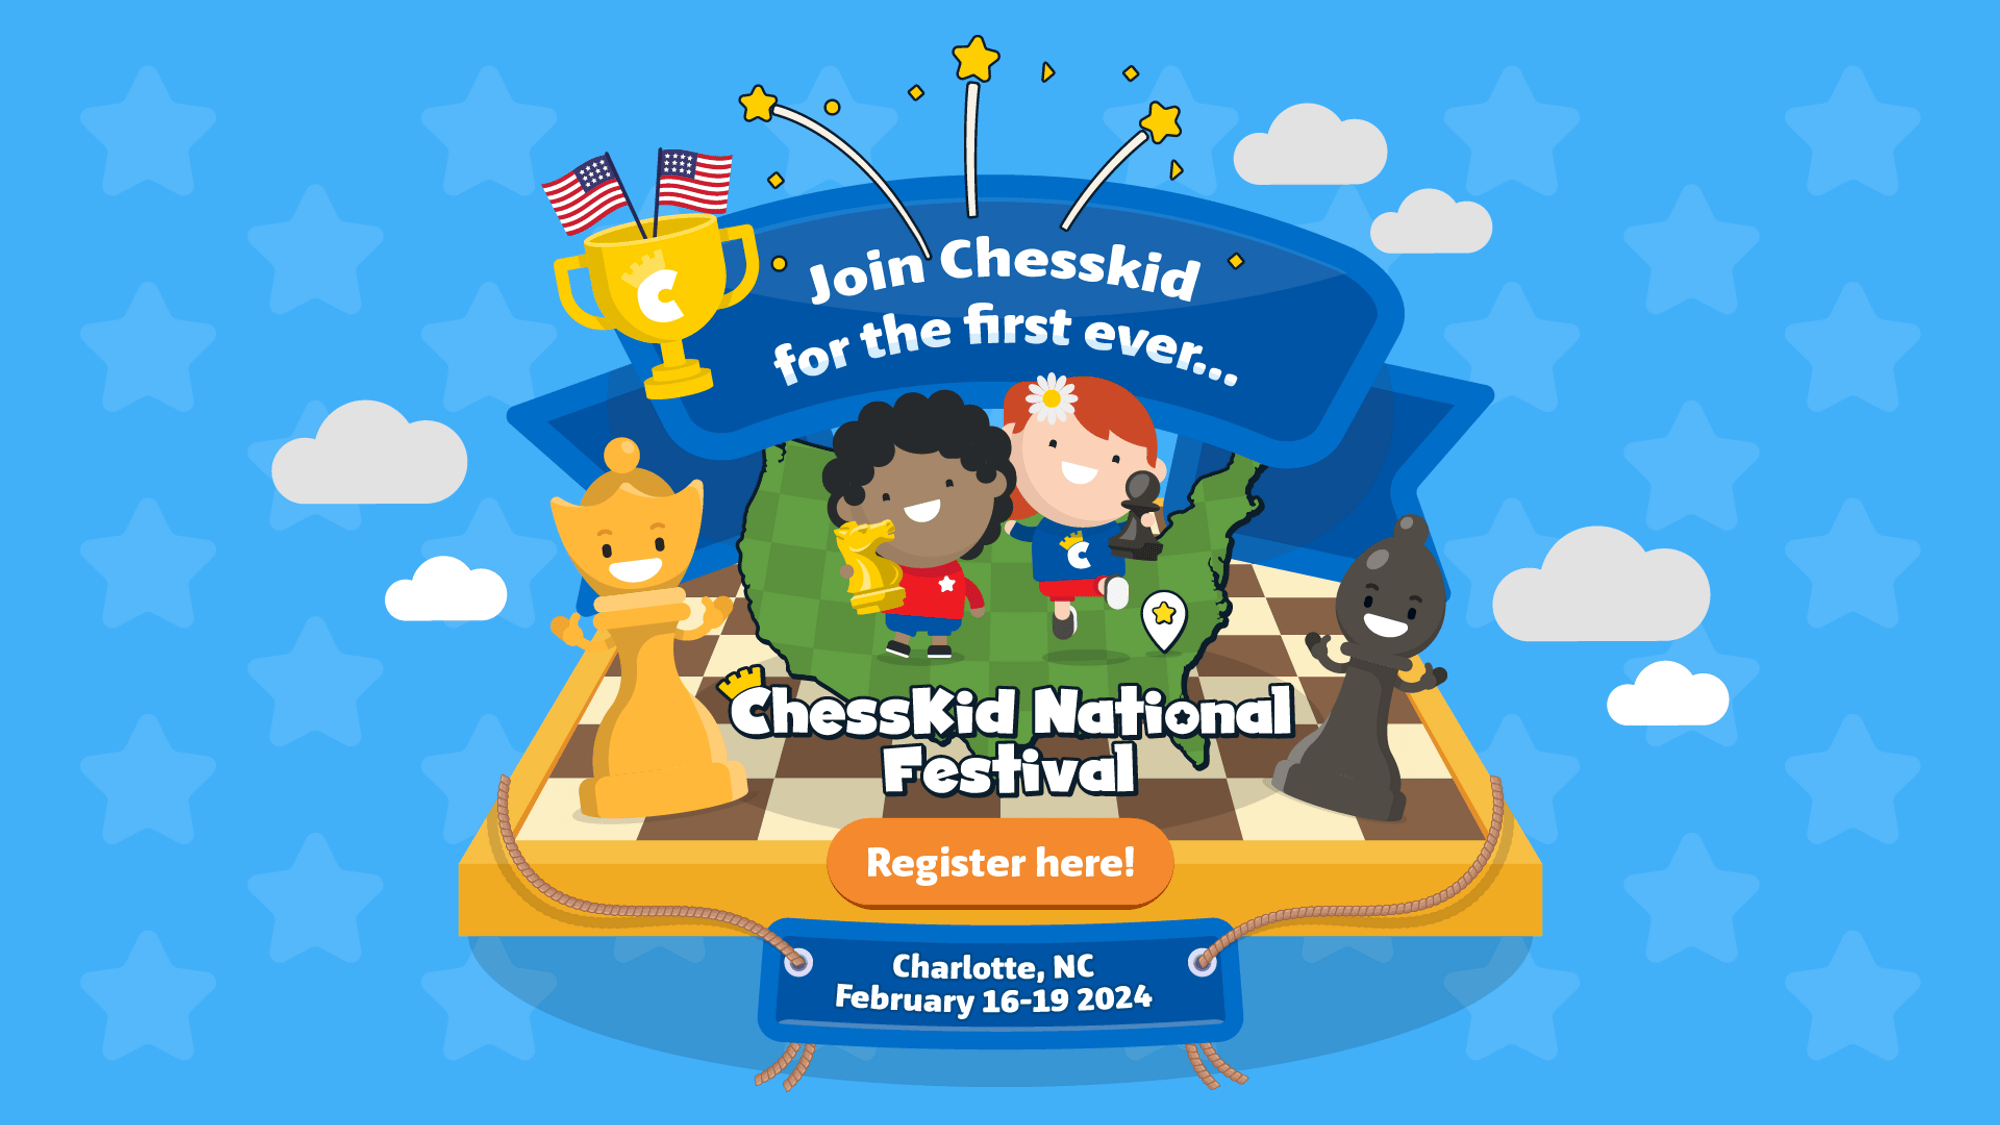 GothamChess on X: Super excited to announce the ChessKid National Festival  in Charlotte, North Carolina, February 2024. I will be there all 4 days  signing books, doing lectures, playing games, and more.